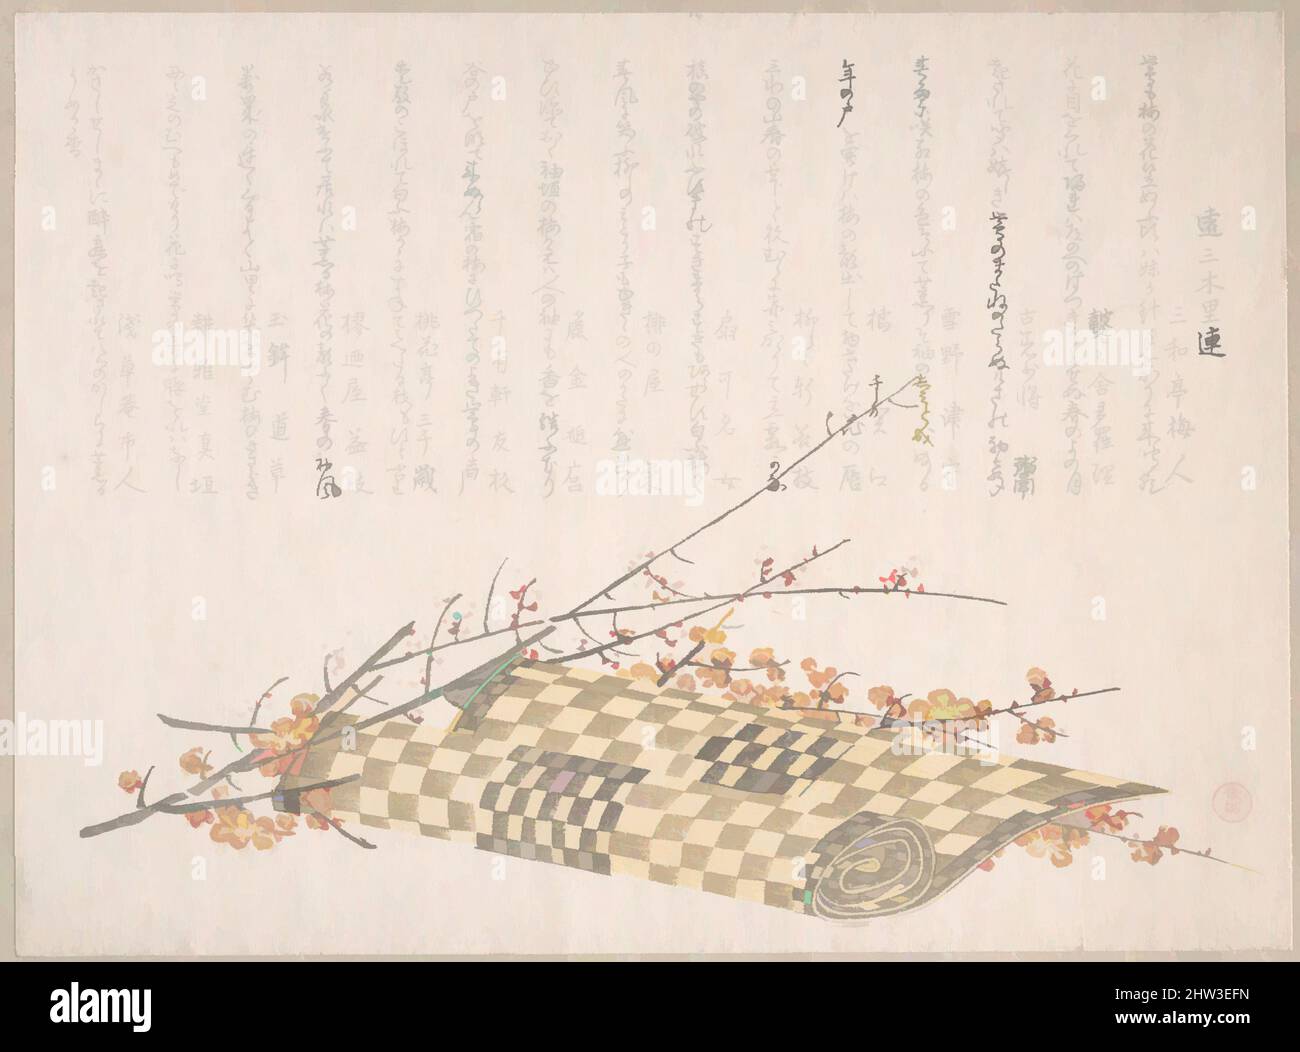 Art inspired by Plum Branches with Flowers and a Rolled Mat, 19th century, Japan, Part of an album of woodblock prints (surimono); ink and color on paper, 6 1/8 x 11 in. (15.6 x 27.9 cm), Prints, Kubo Shunman (Japanese, 1757–1820, Classic works modernized by Artotop with a splash of modernity. Shapes, color and value, eye-catching visual impact on art. Emotions through freedom of artworks in a contemporary way. A timeless message pursuing a wildly creative new direction. Artists turning to the digital medium and creating the Artotop NFT Stock Photo